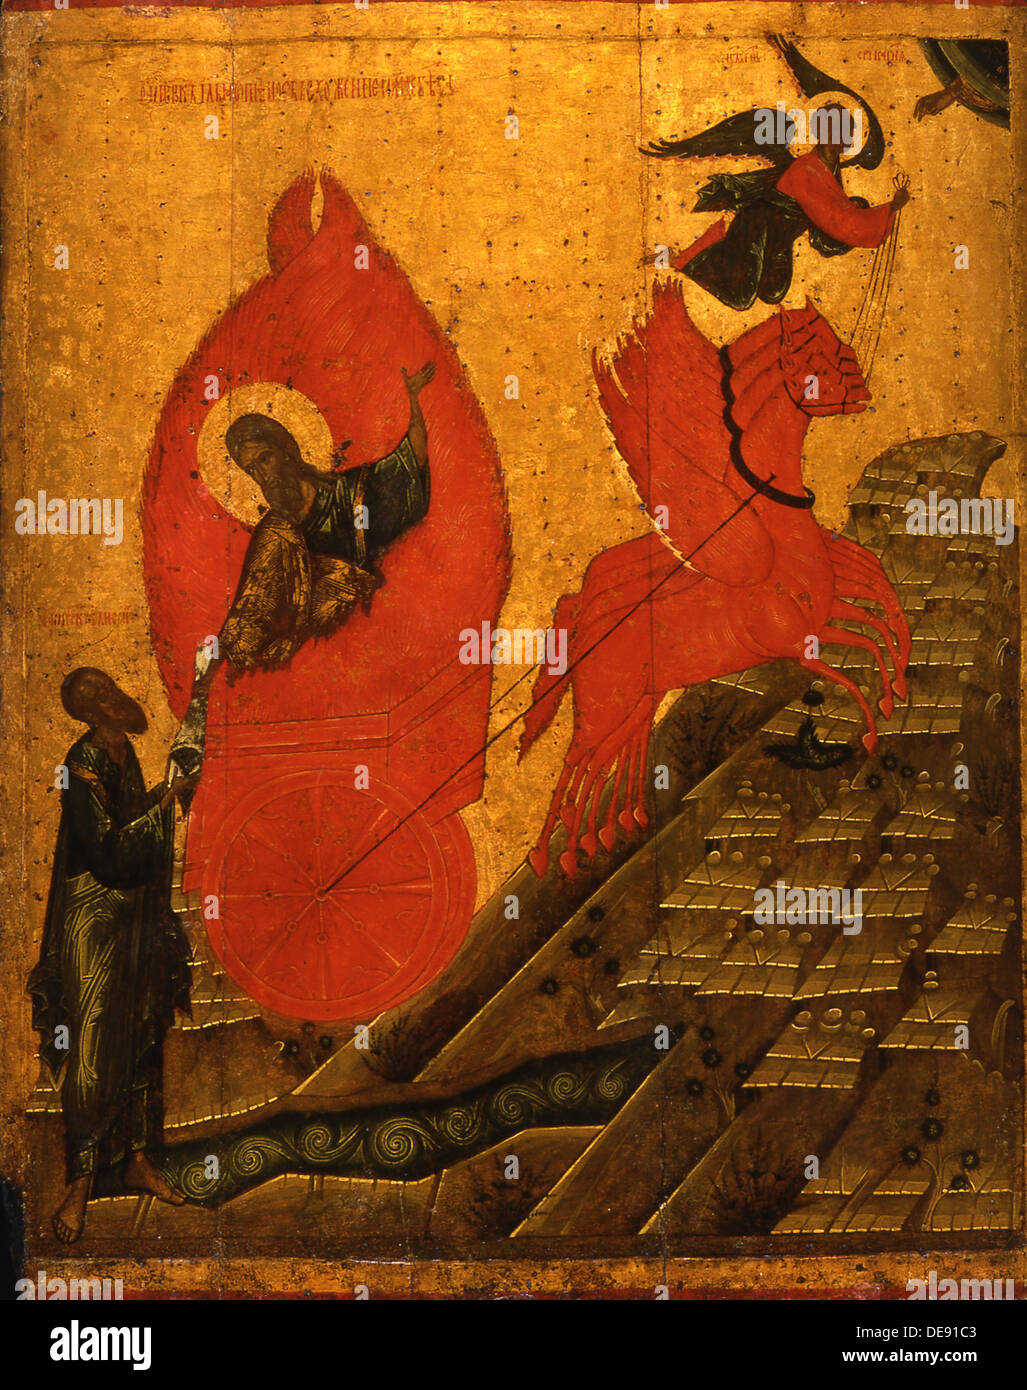 The Prophet Elijah and the Fiery Chariot, Early16th cen.. Artist: Russian icon Stock Photo